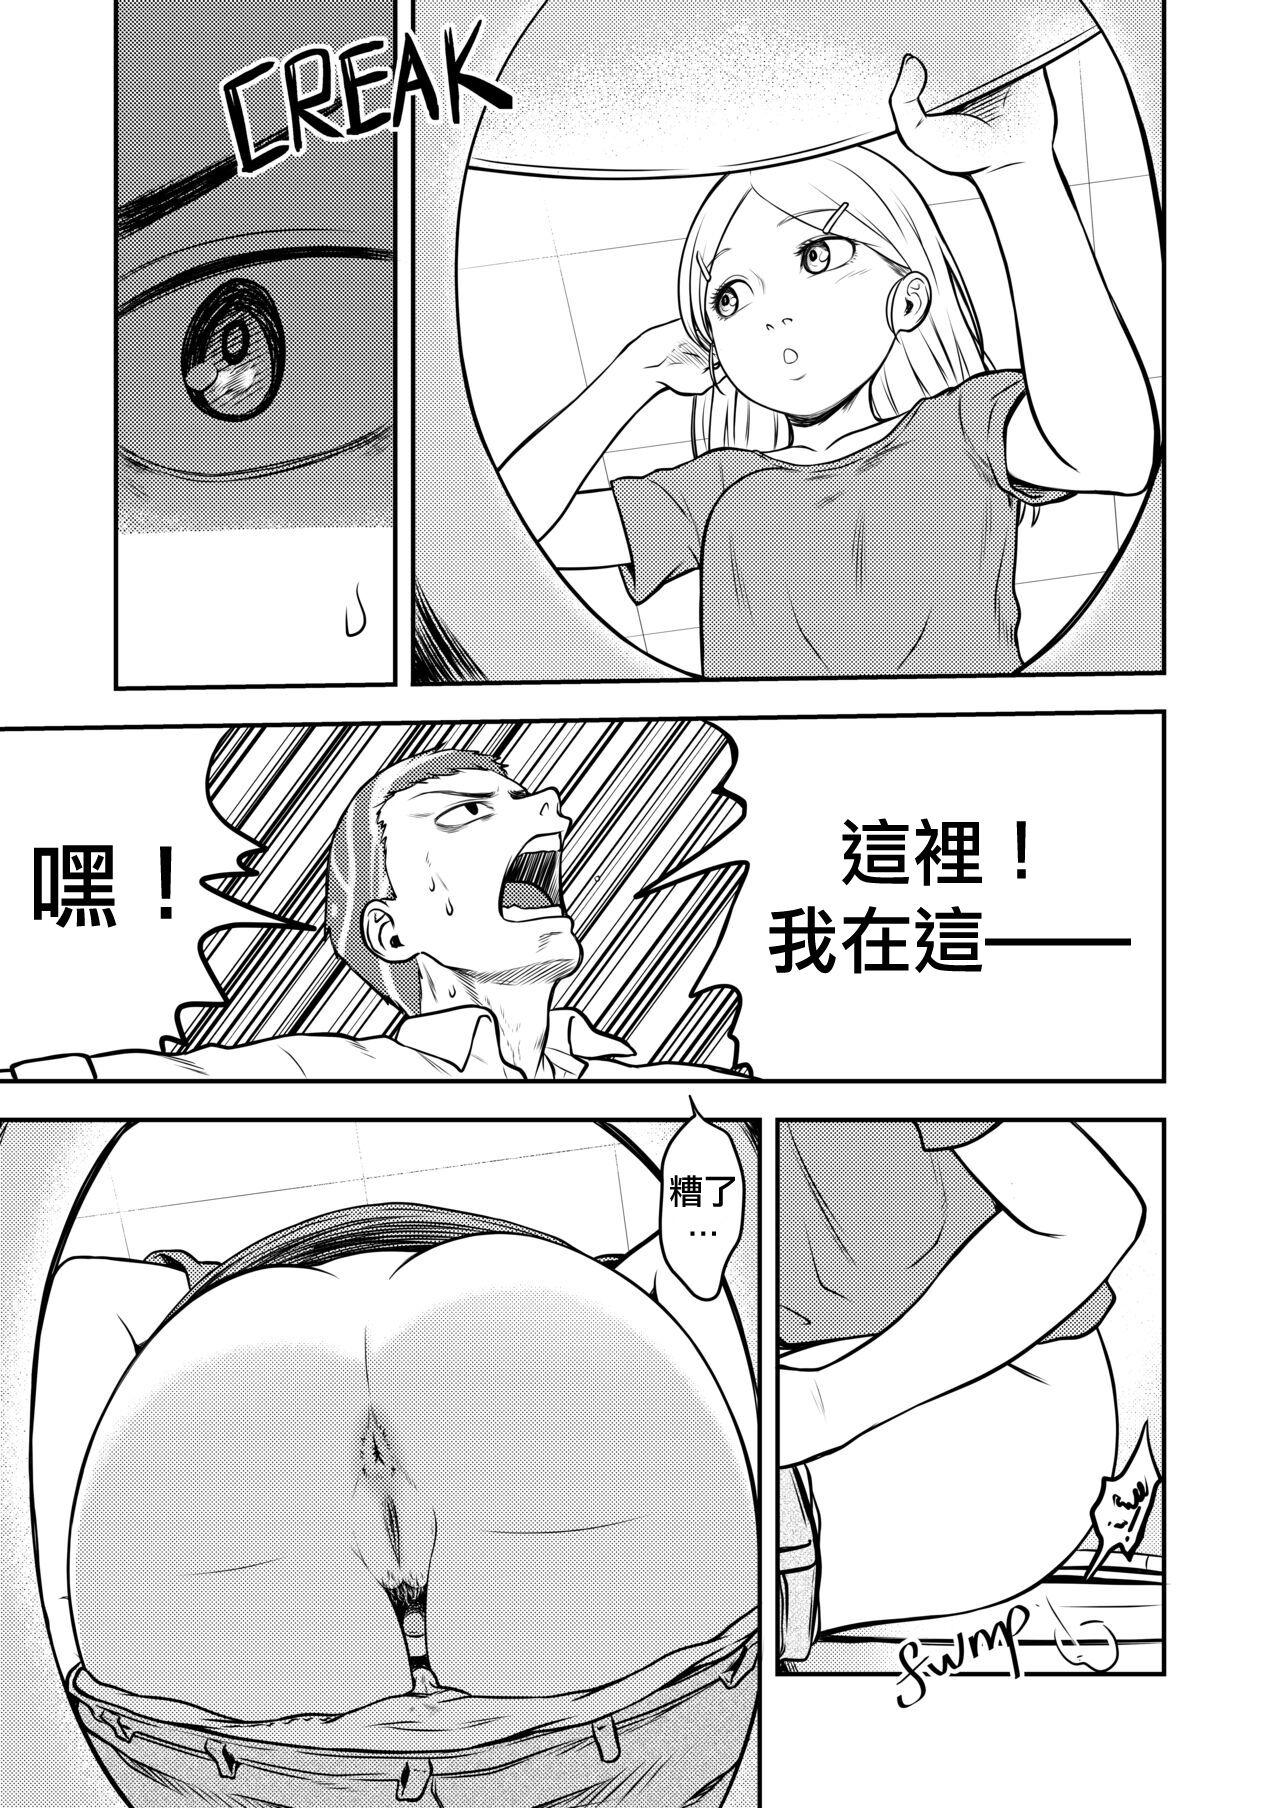 Lolicon Scat story - Original Gayhardcore - Page 6